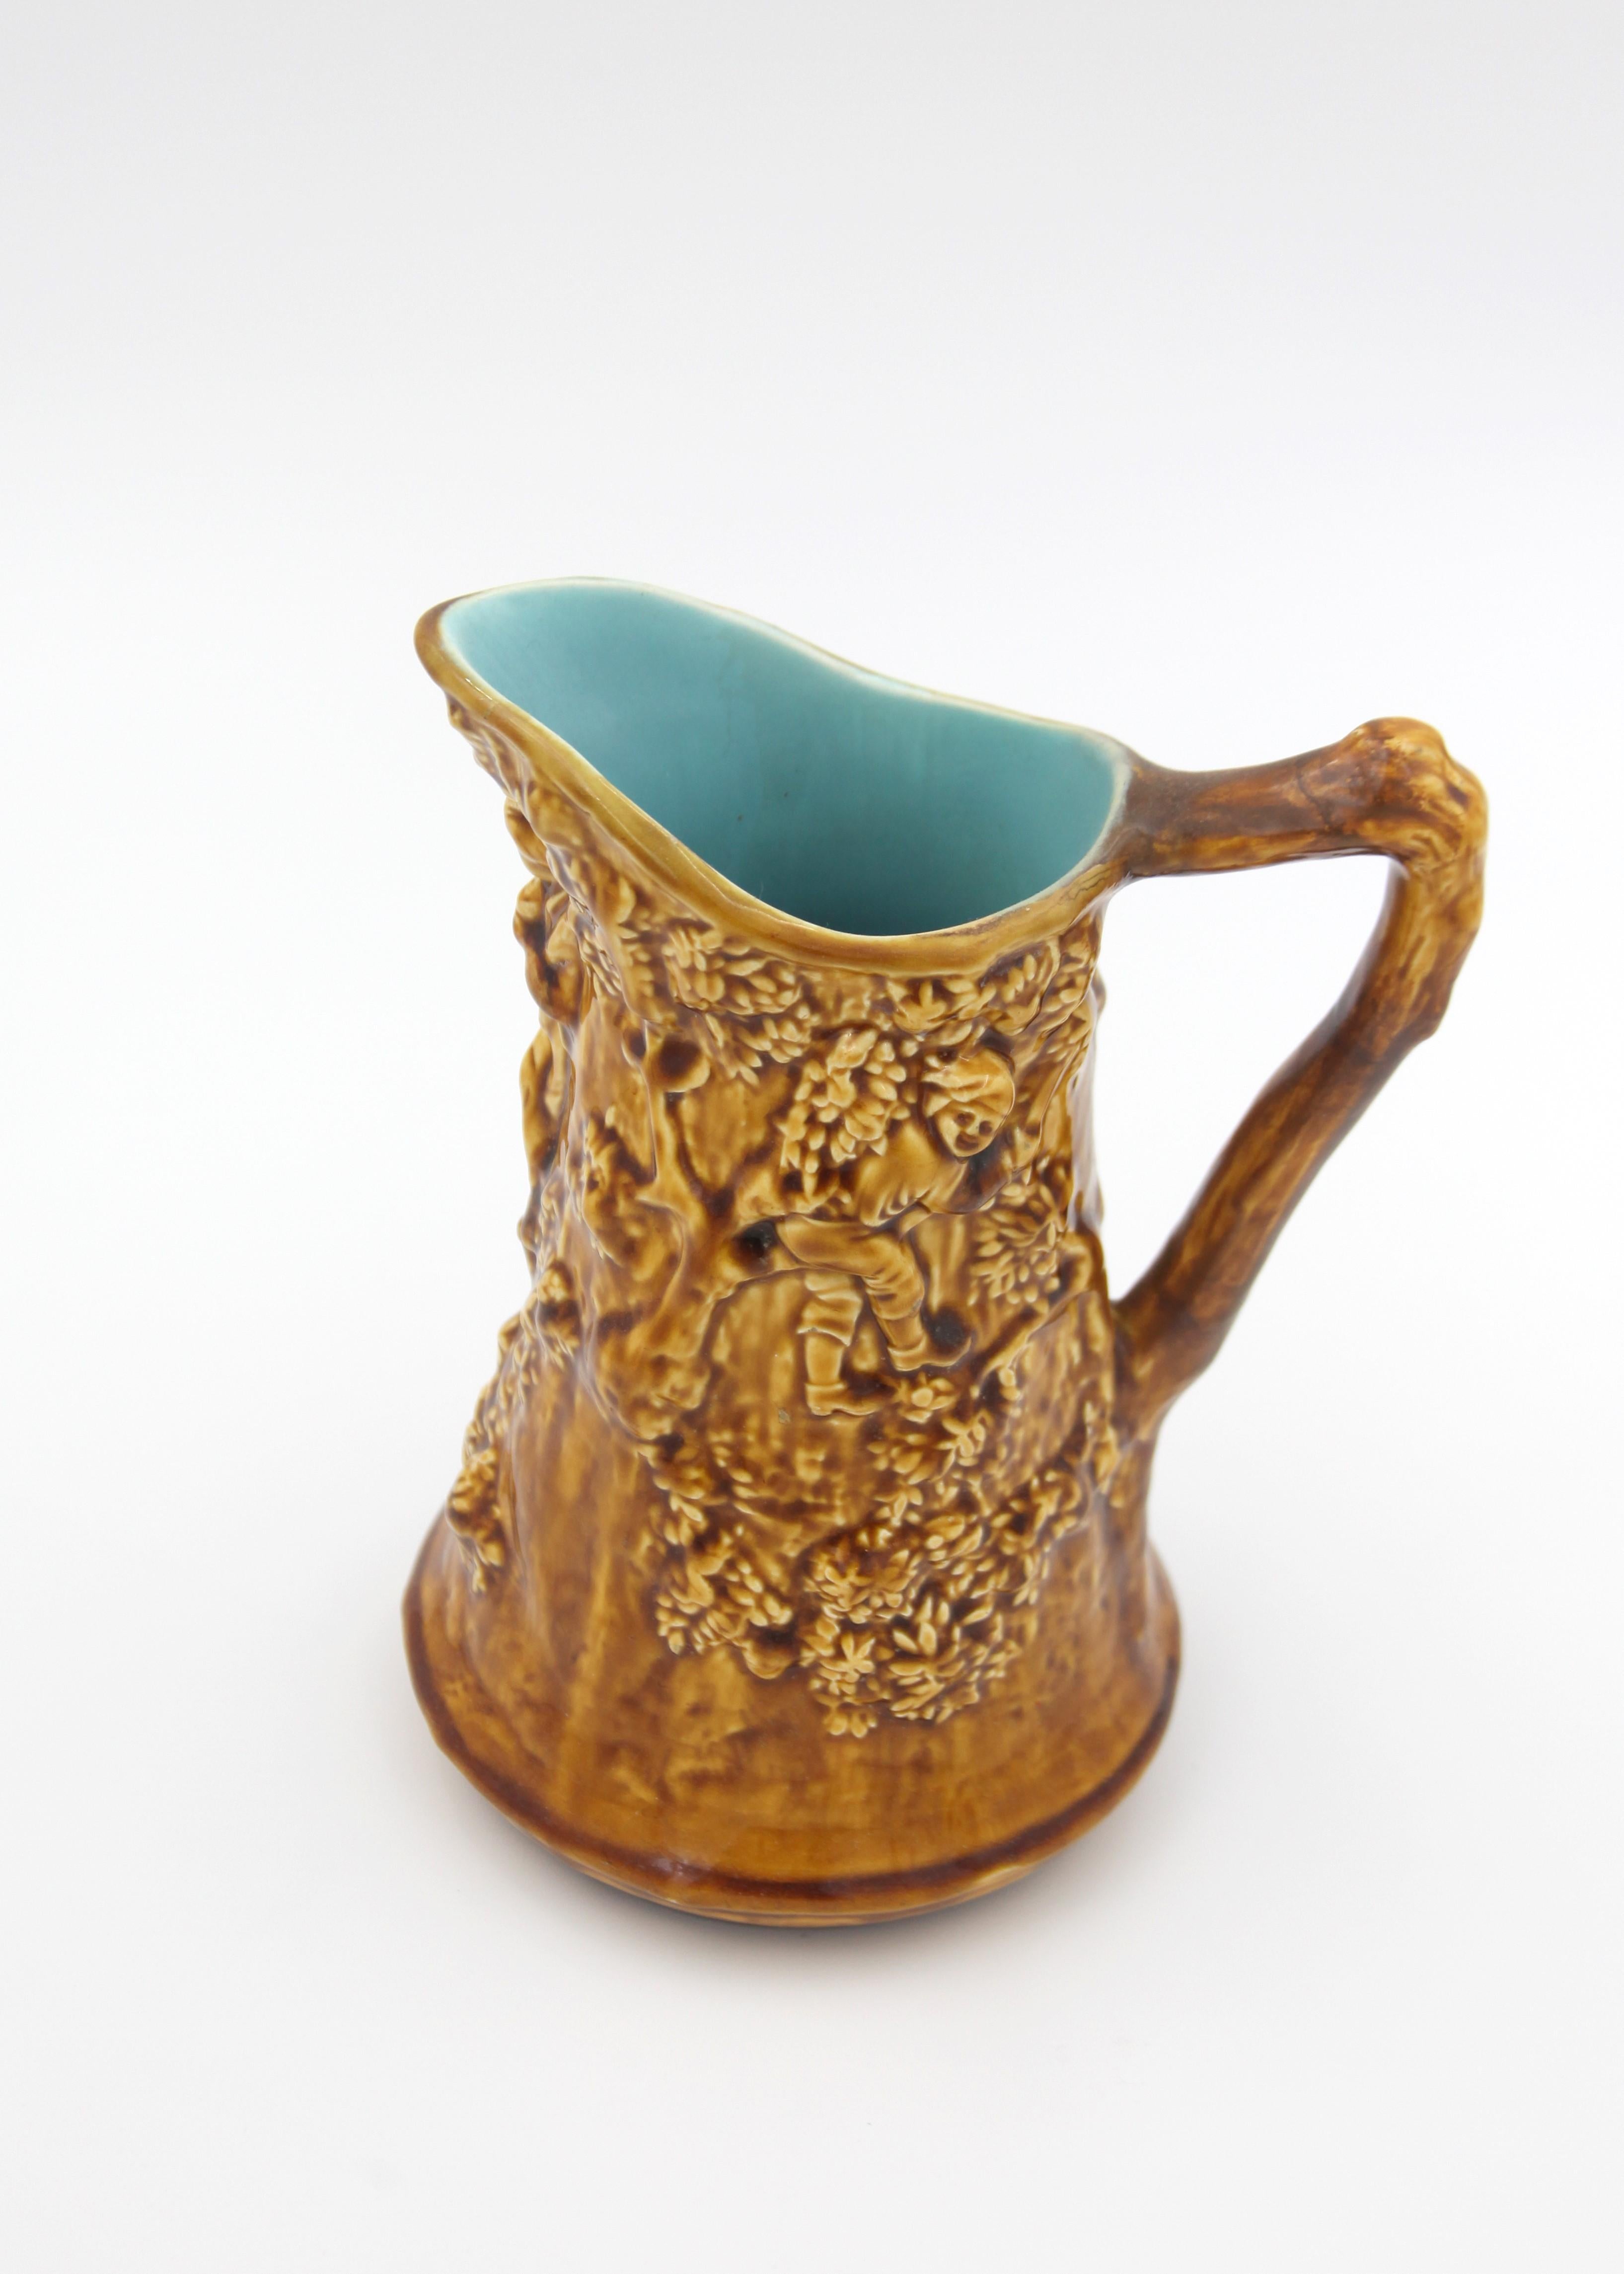 Mellow down with history and pour out a tale from the 19th century with this majolica pitcher from Sarreguemines. Admired for its unique mustard hue, this historical piece of pottery adds a tinge of vintage charm to your ceramic collection. As the